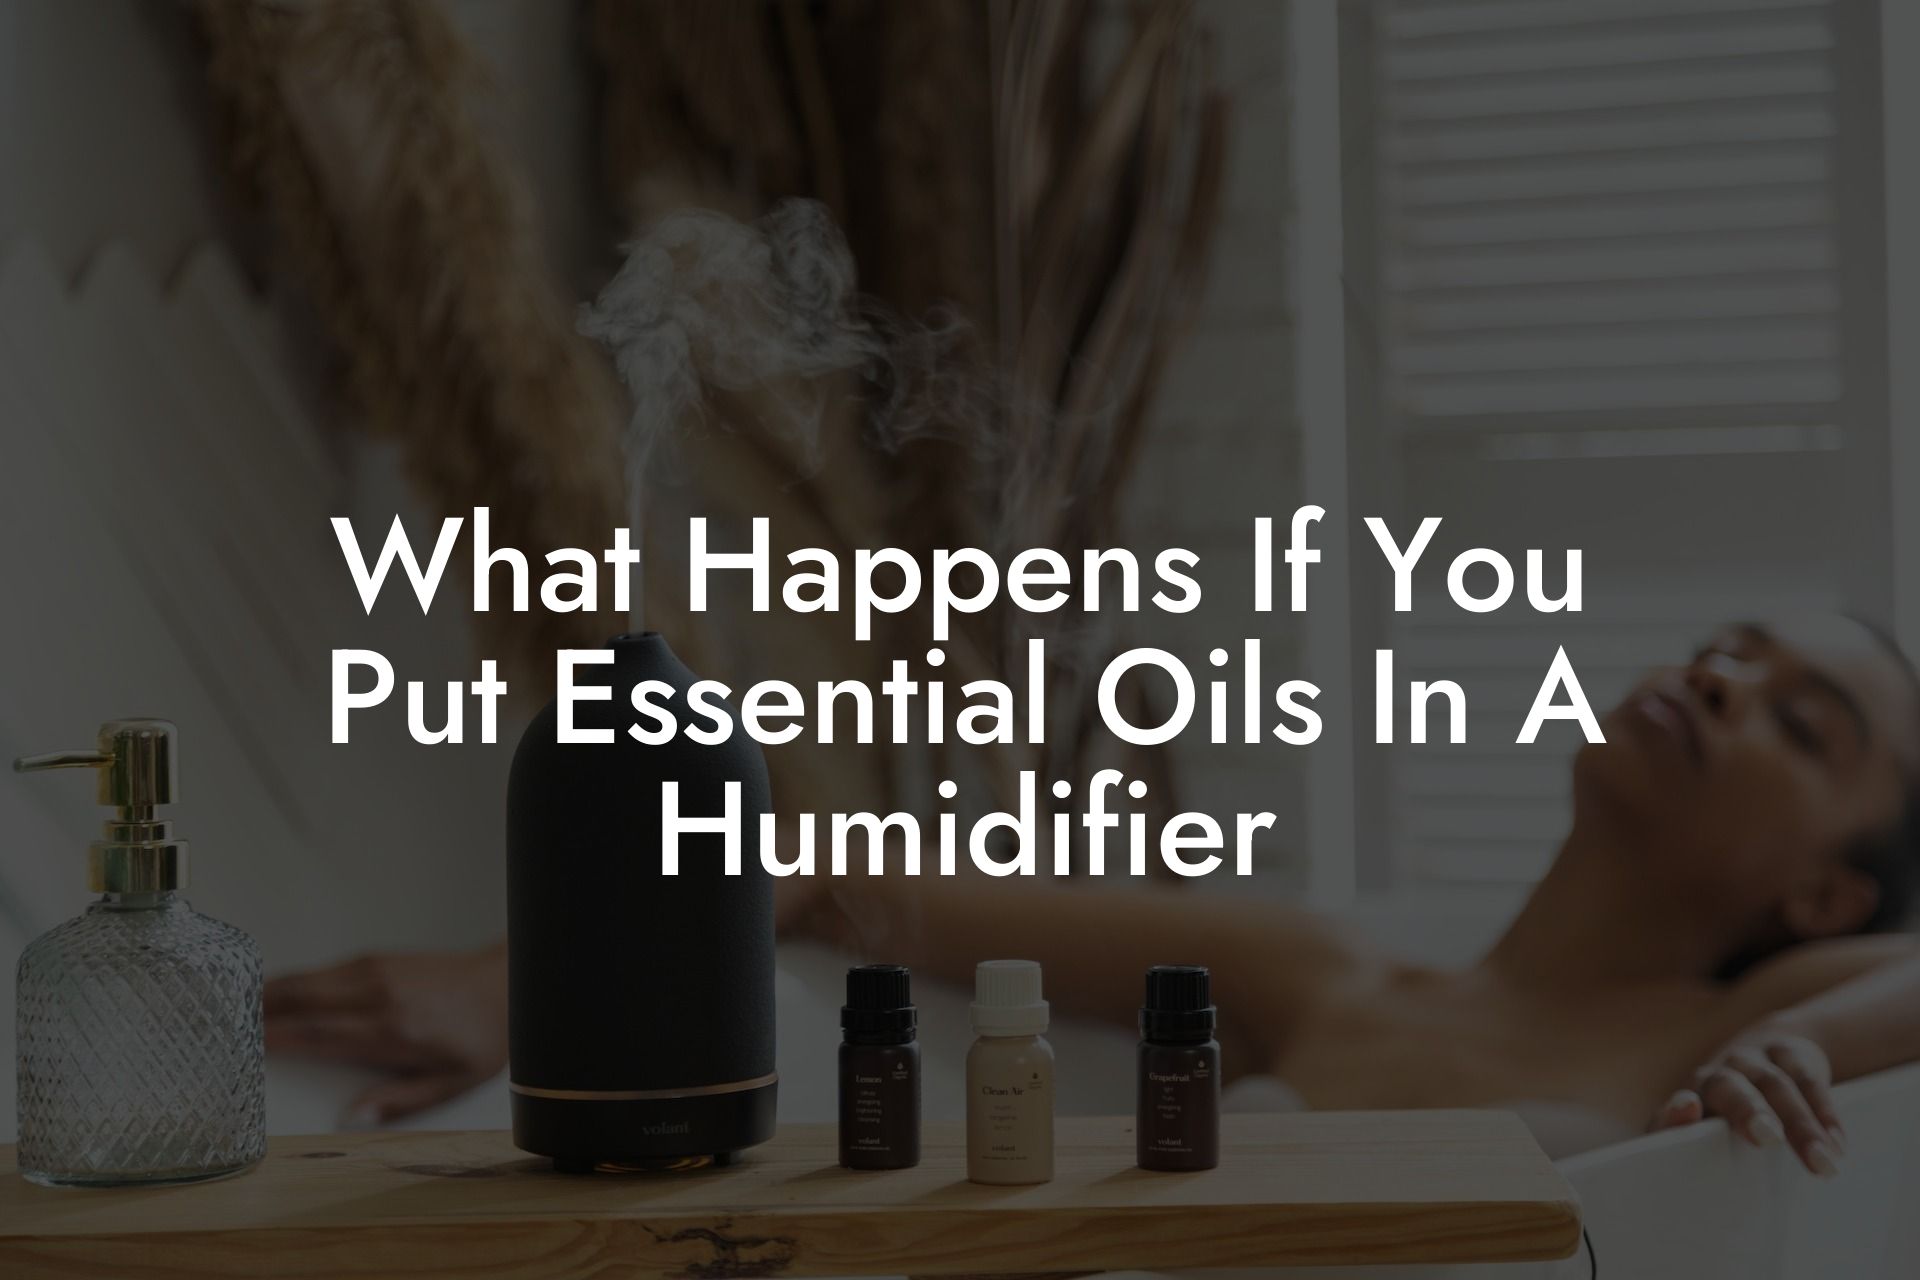 What Happens If You Put Essential Oils In A Humidifier